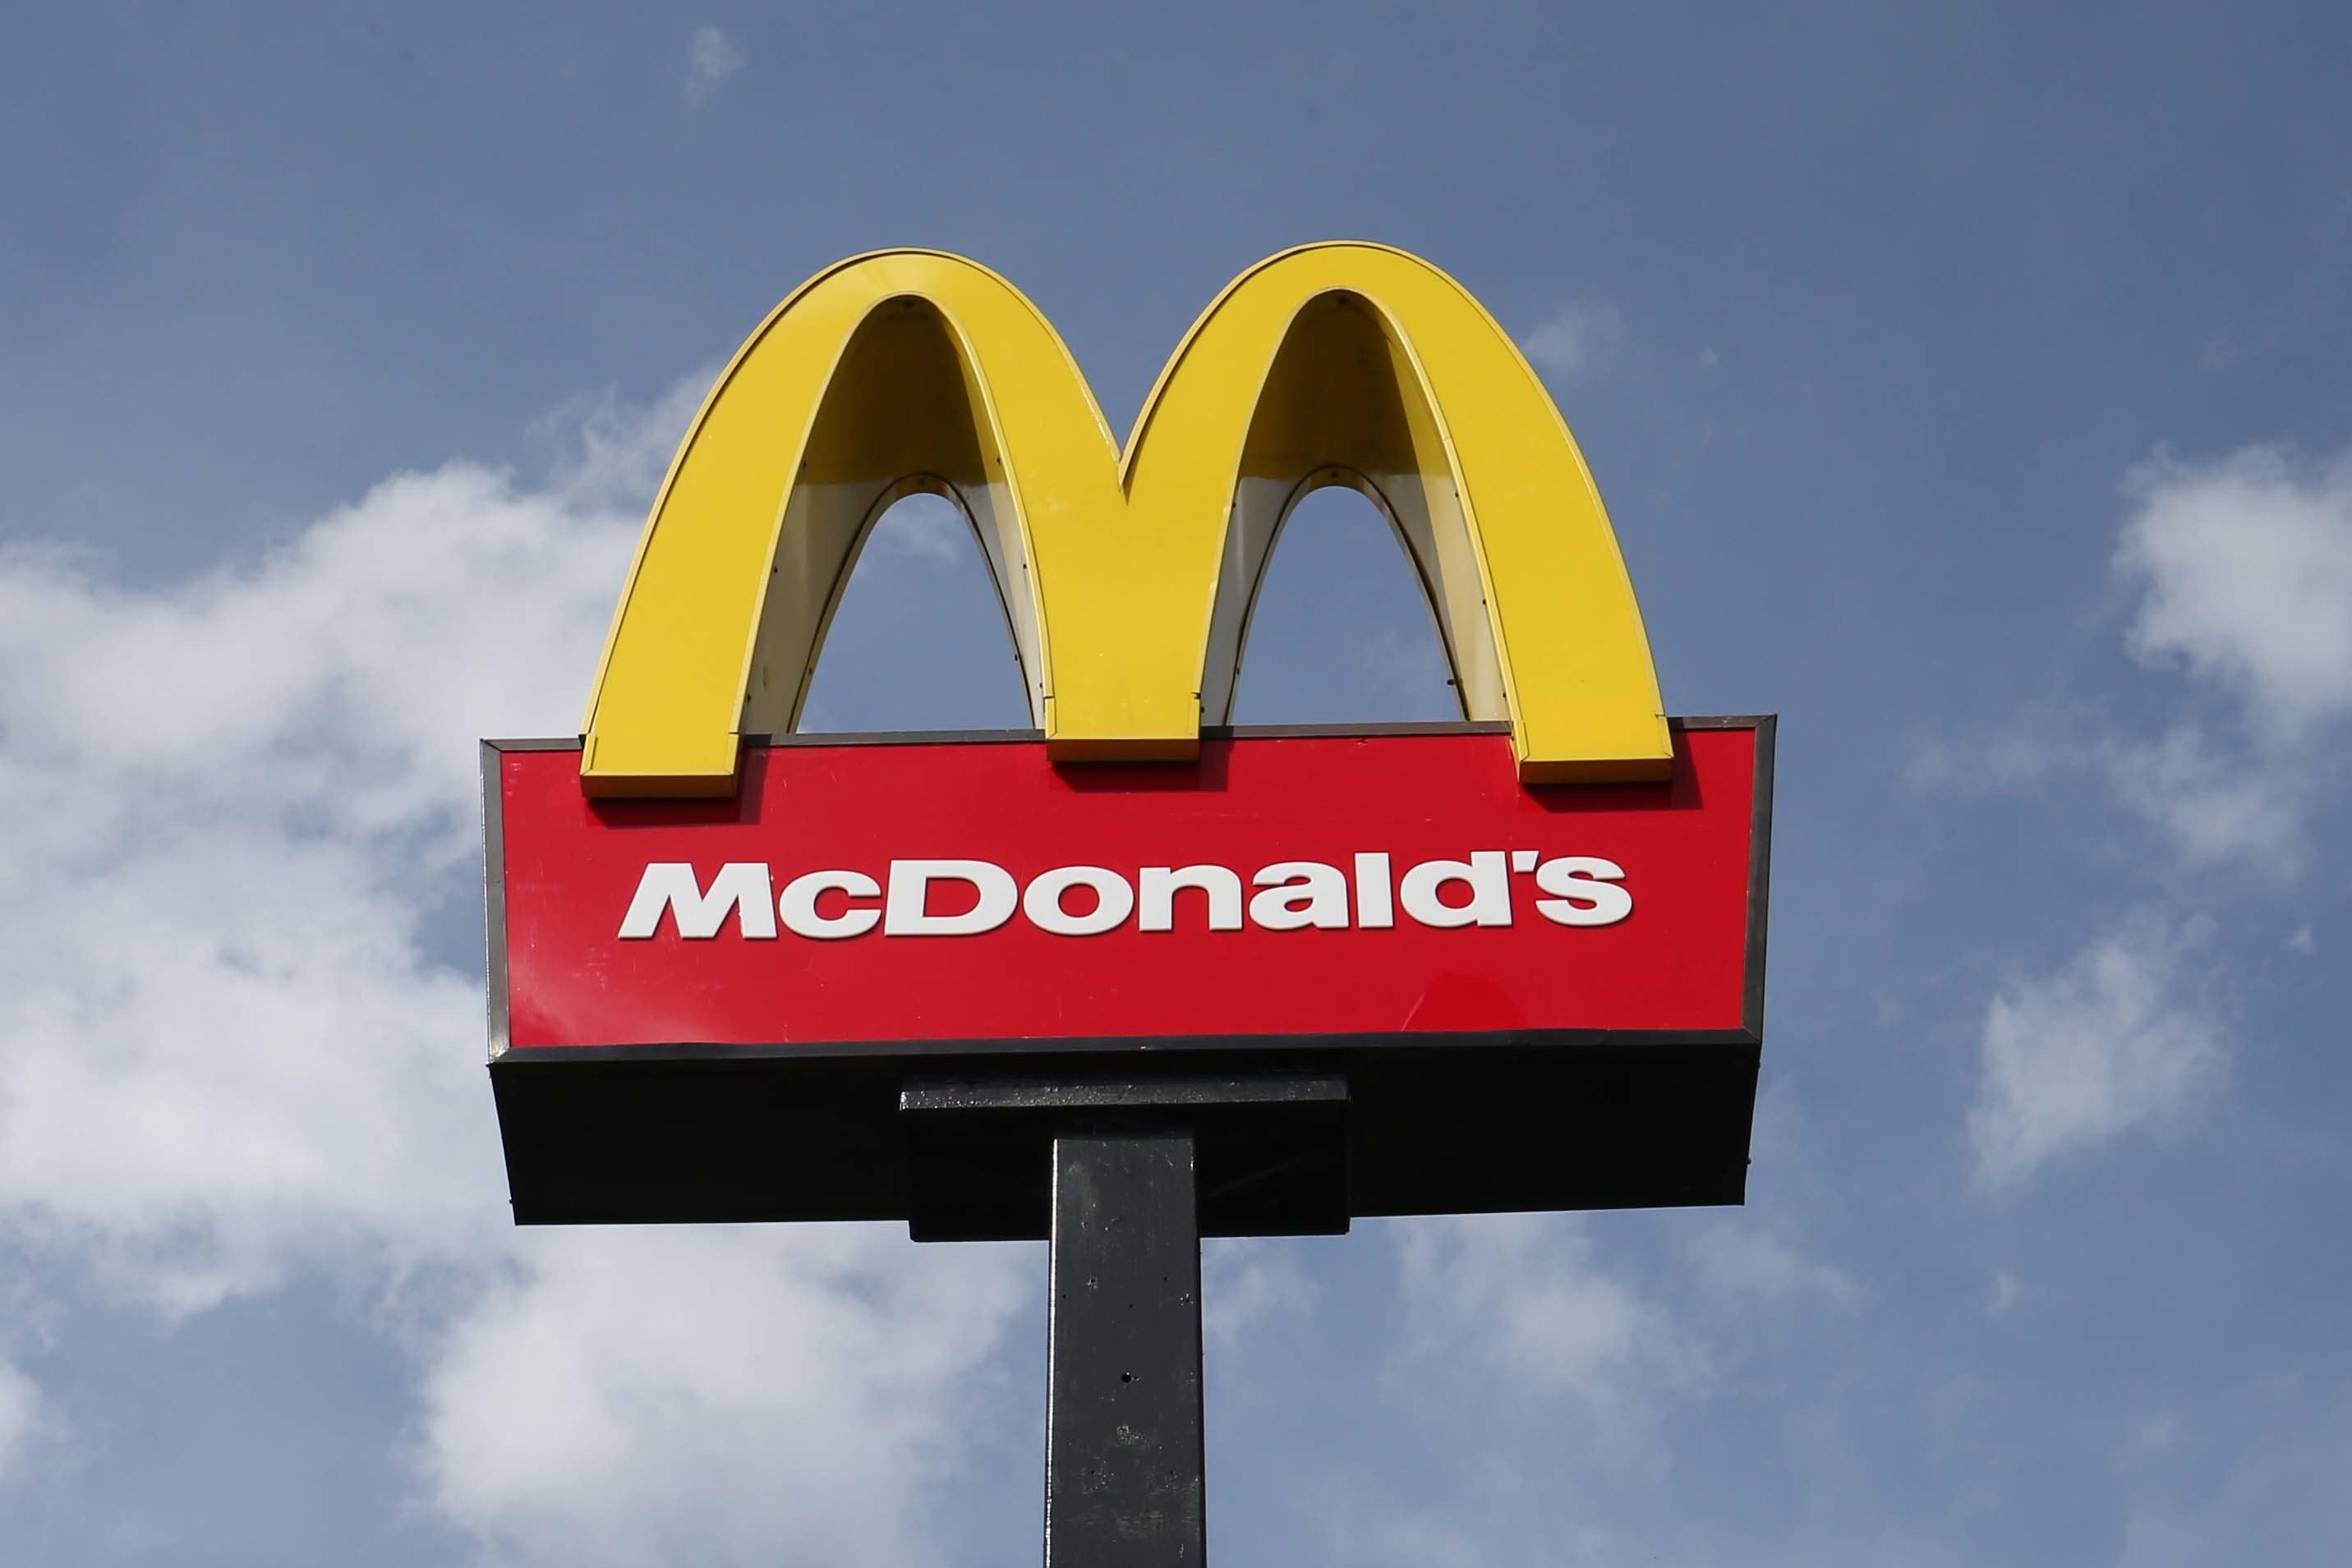 McDonalds sued over hot coffee spill three decades after landmark case The Independent